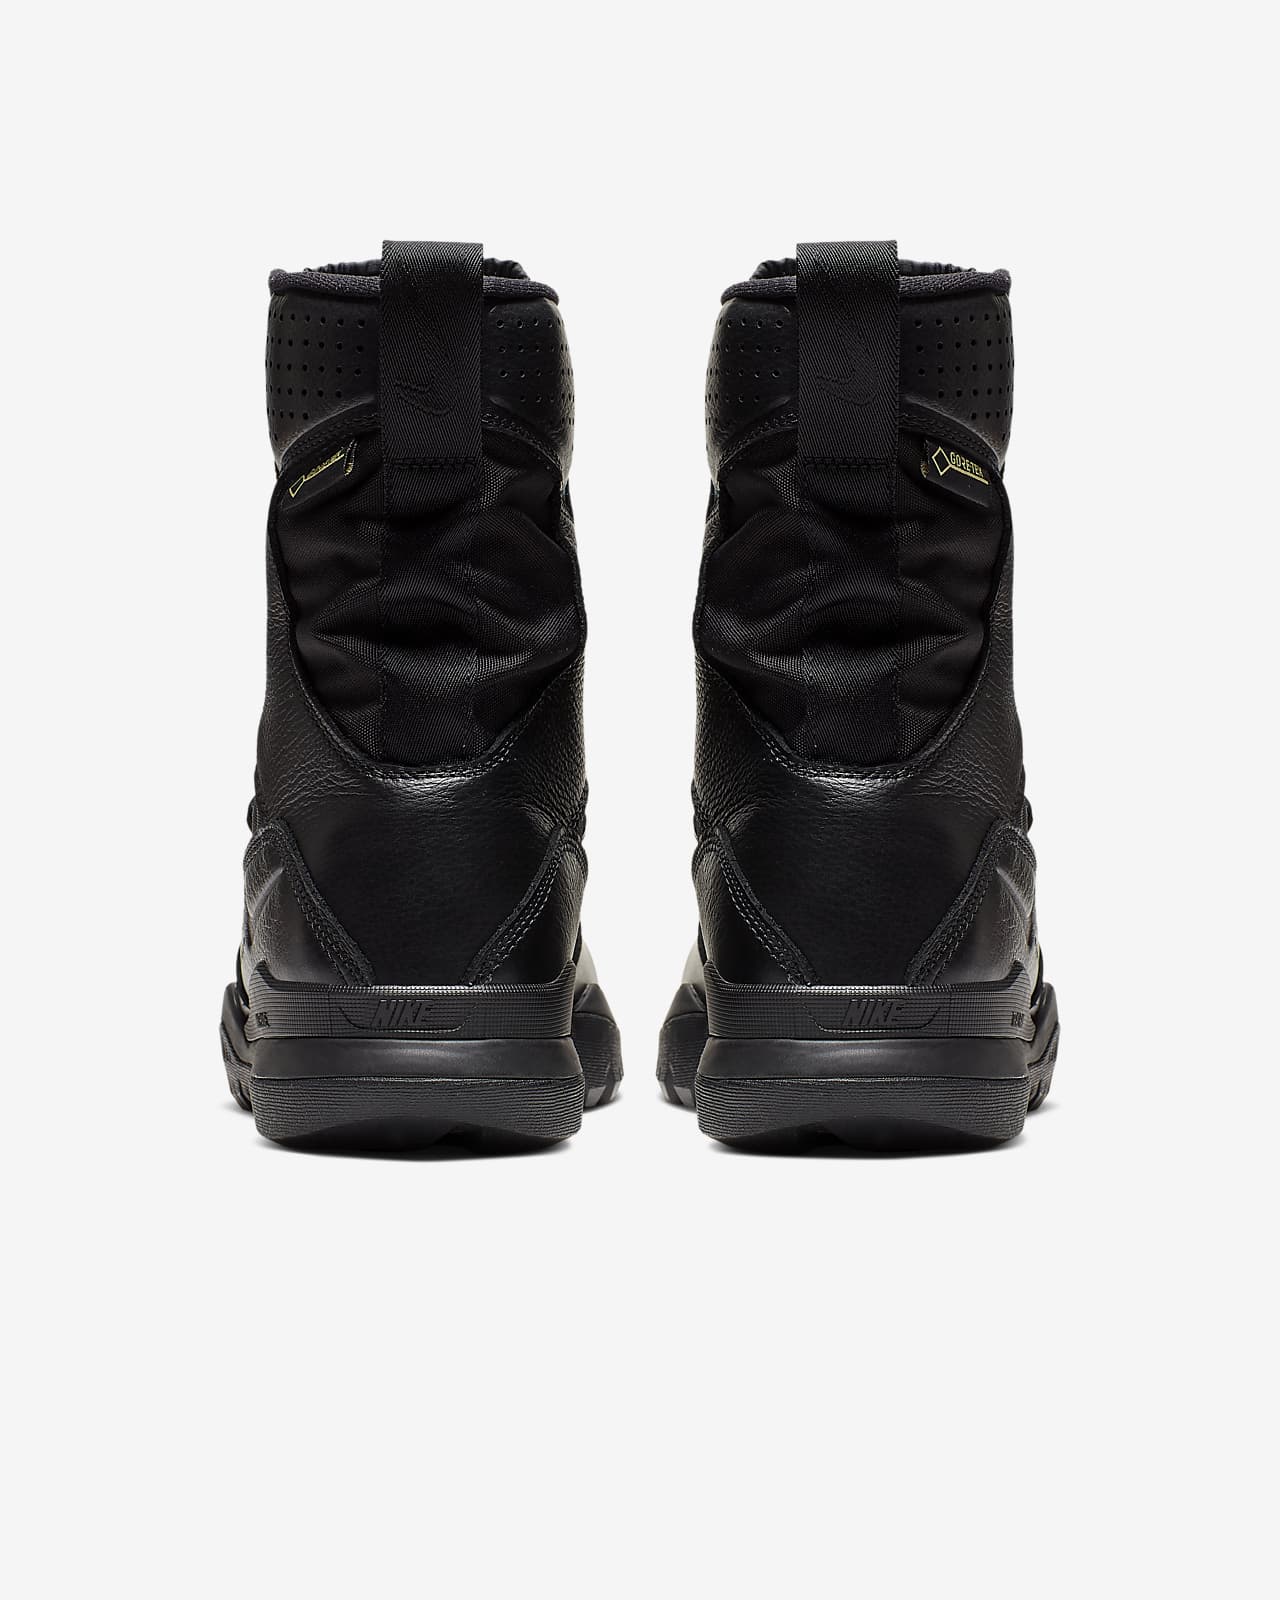 Nike Field 2 8" GORE-TEX Tactical Boot.